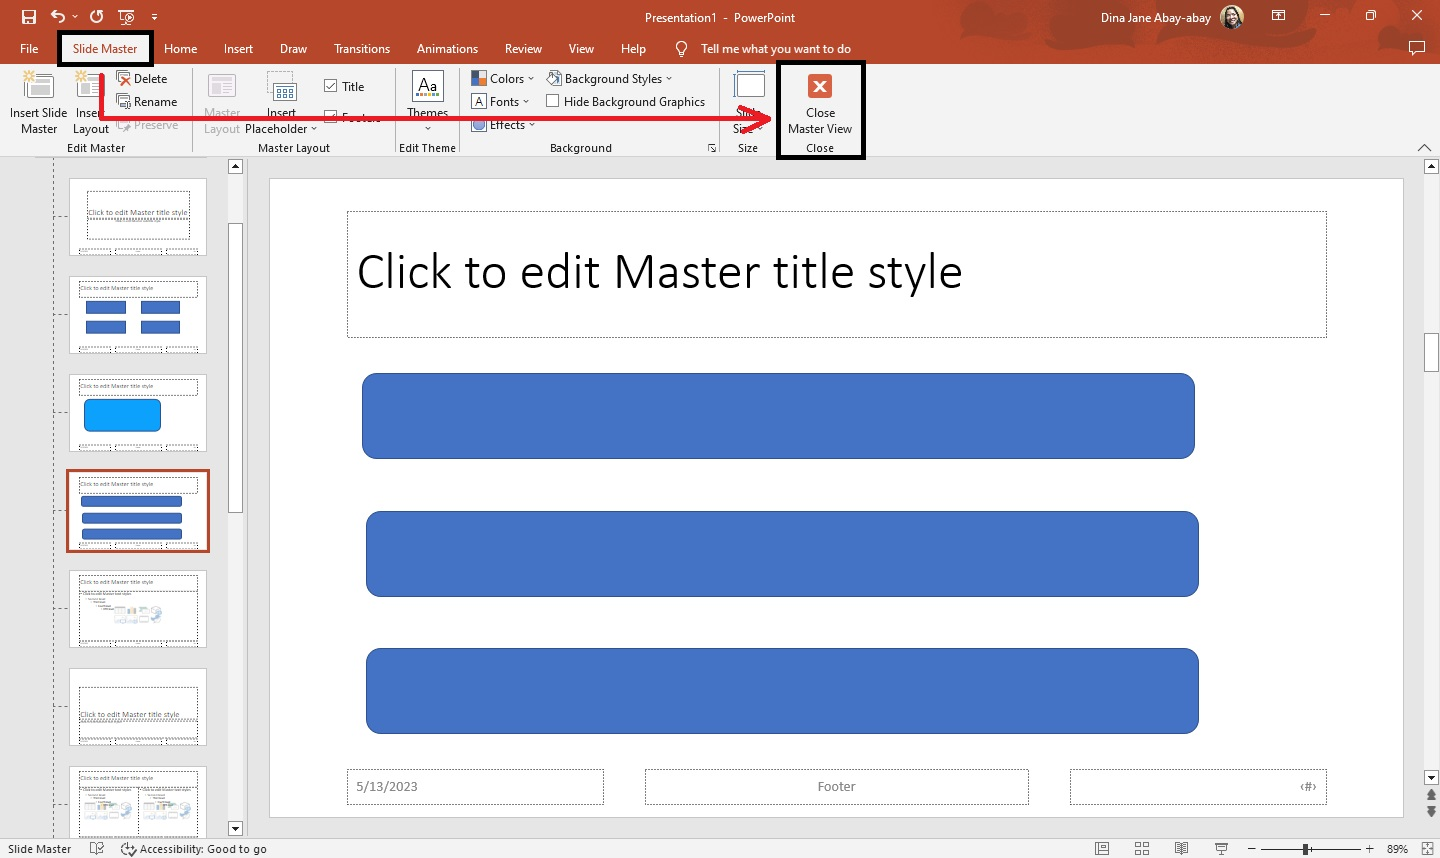 Click the "Close Master View" from your "Slide Master" tab.